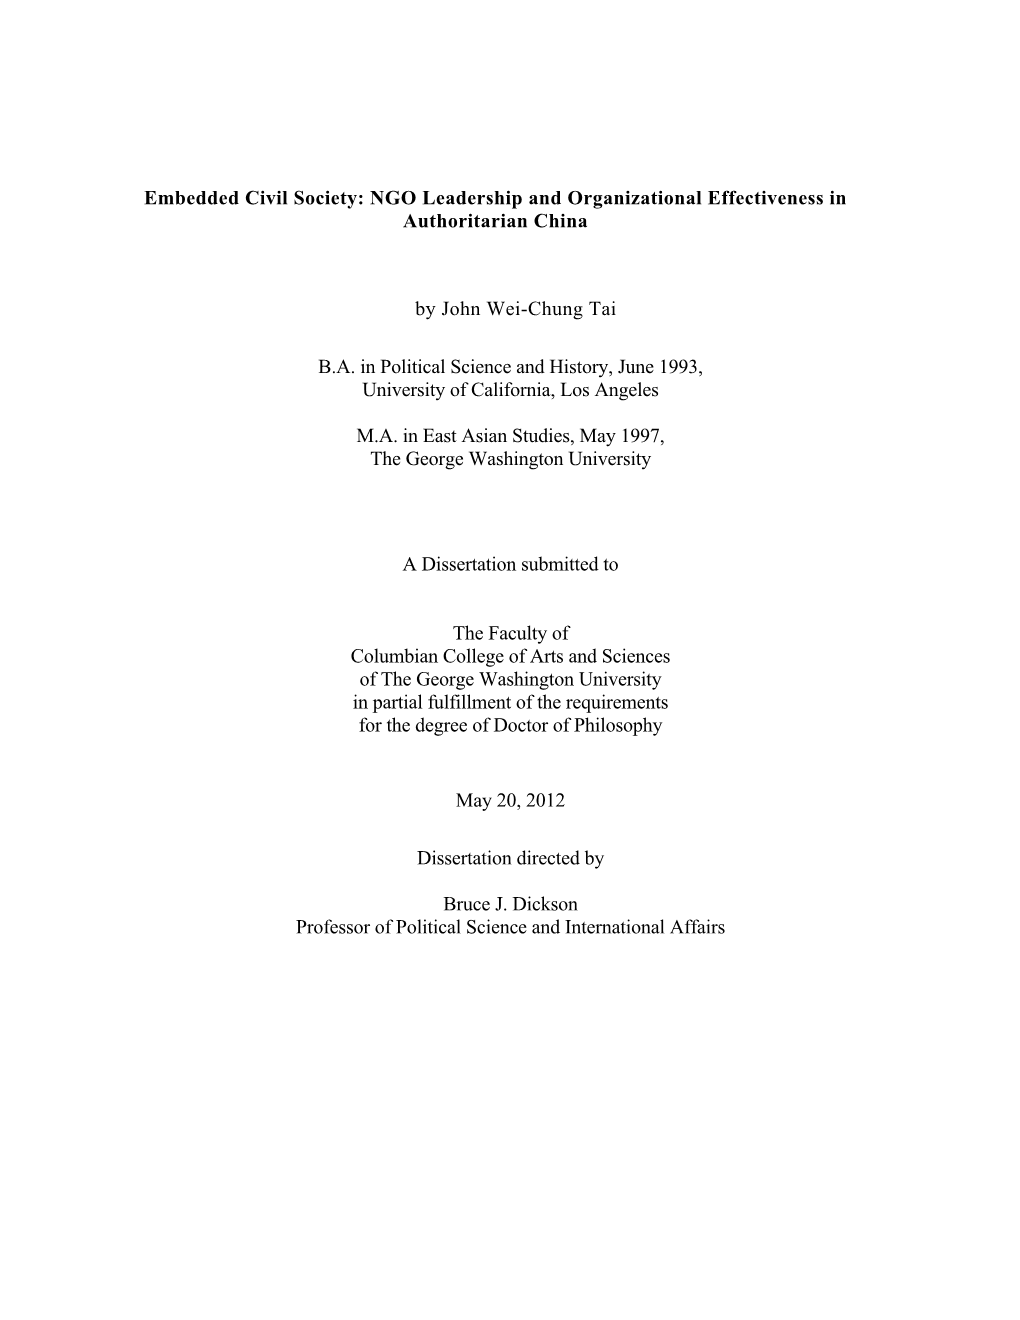 Embedded Civil Society: NGO Leadership and Organizational Effectiveness in Authoritarian China